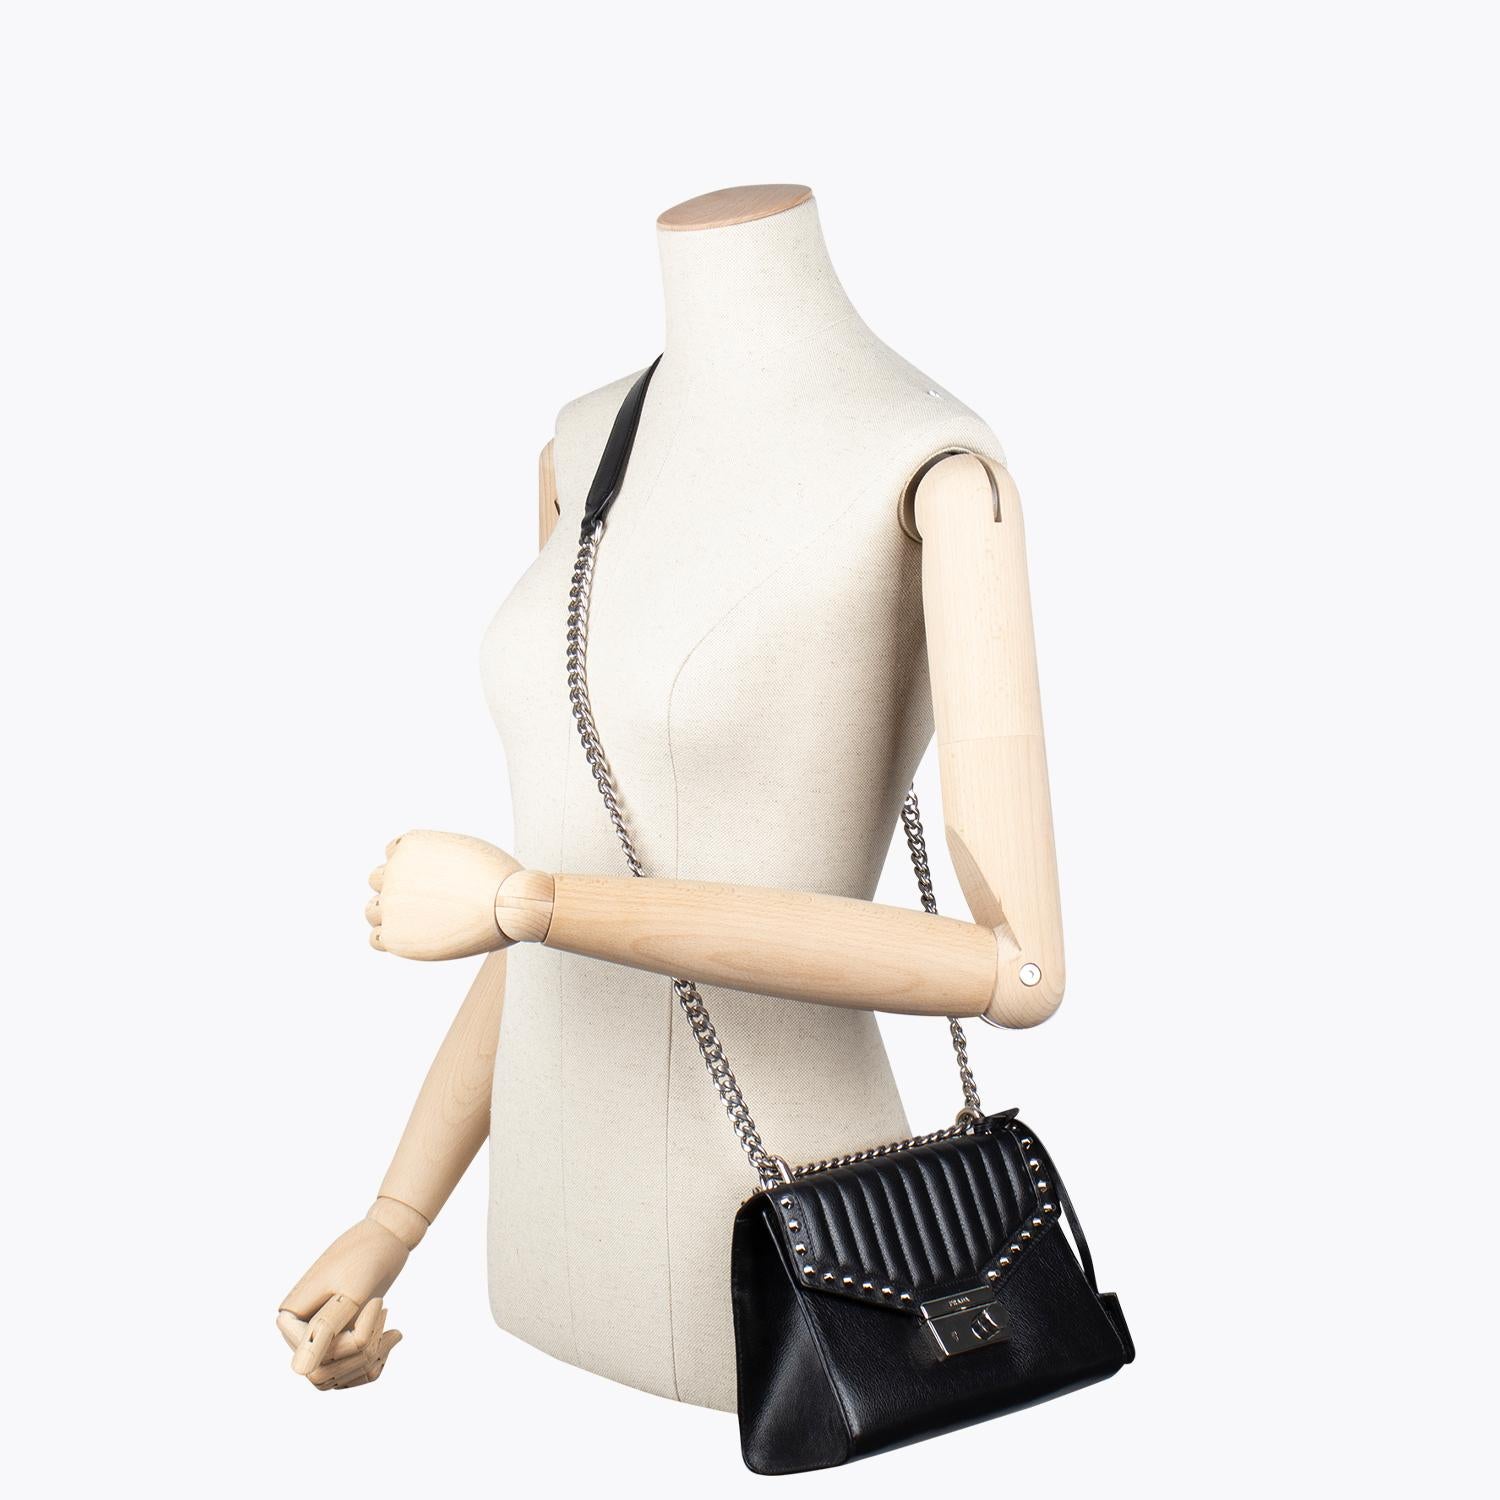 Prada Studded Chain Crossbody Bag In Excellent Condition For Sale In Sundbyberg, SE